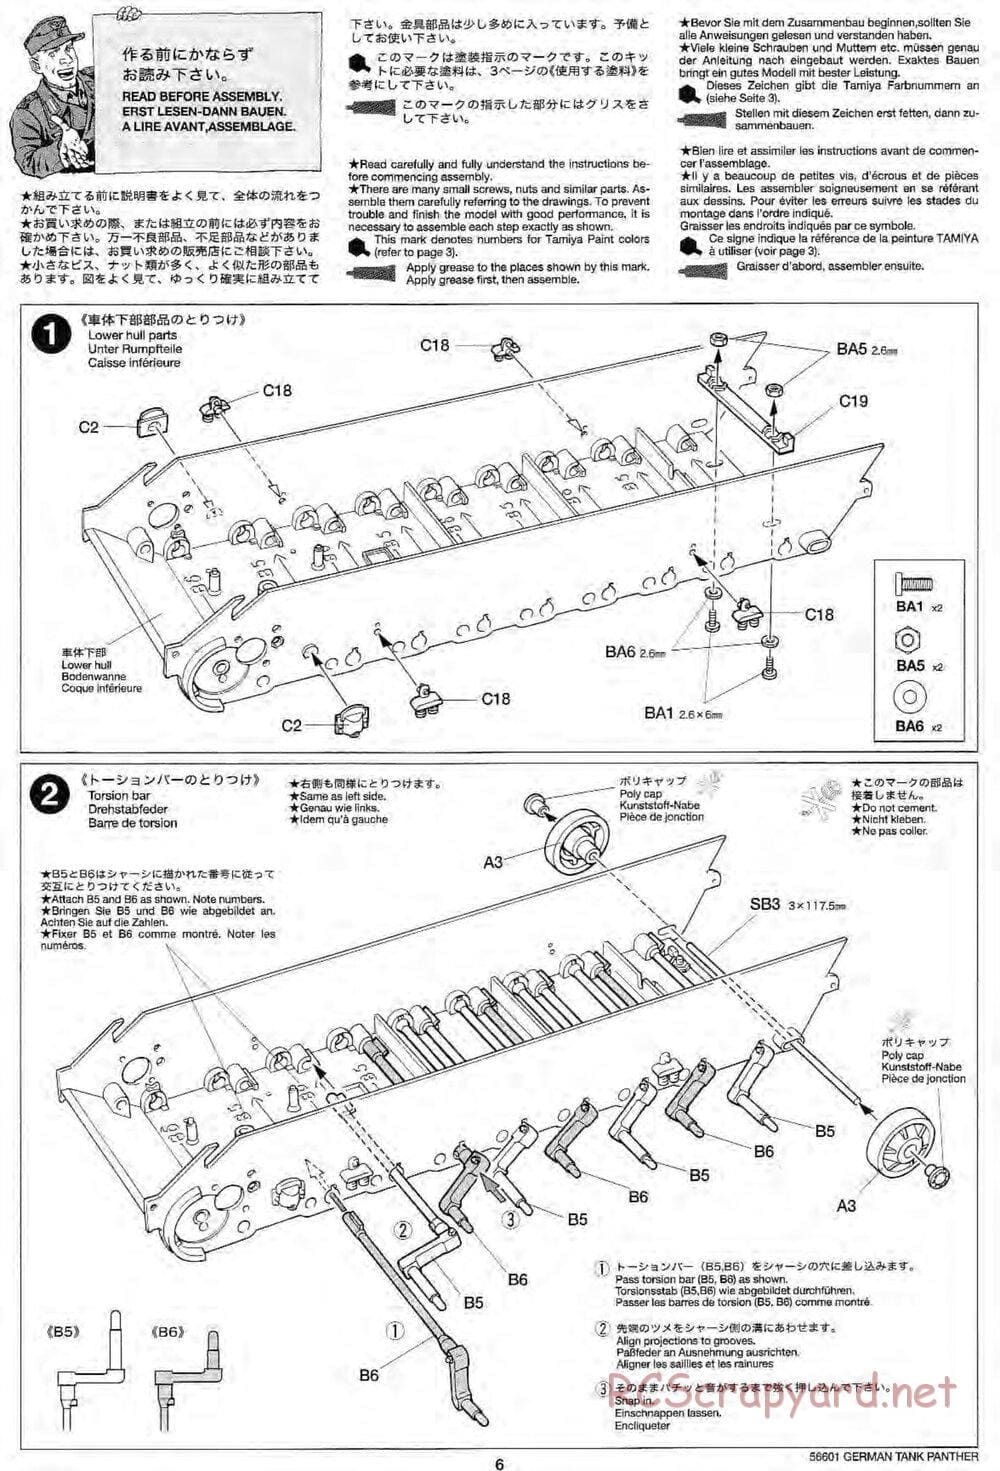 Tamiya - German Tank Panther A - 1/25 Scale Chassis - Manual - Page 6